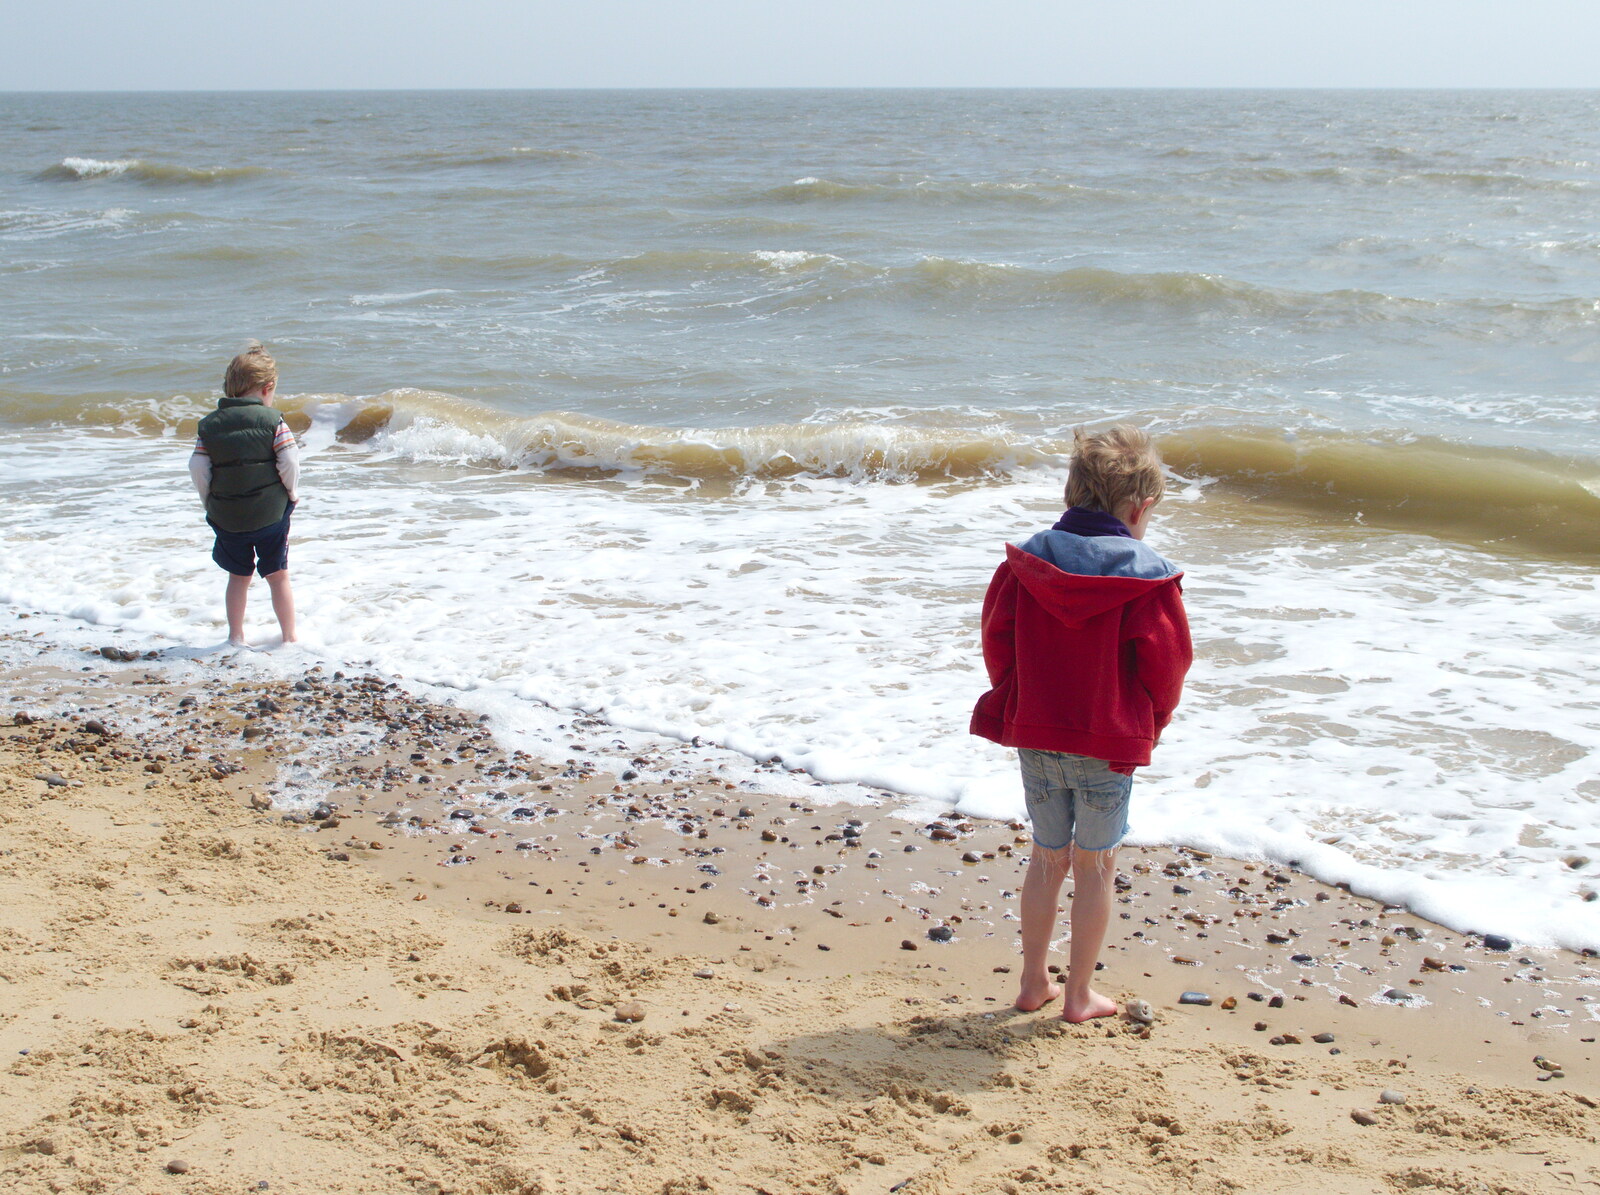 Oak and Fred go for a paddle from Life's A Windy Beach, Walberswick, Suffolk - 5th May 2014